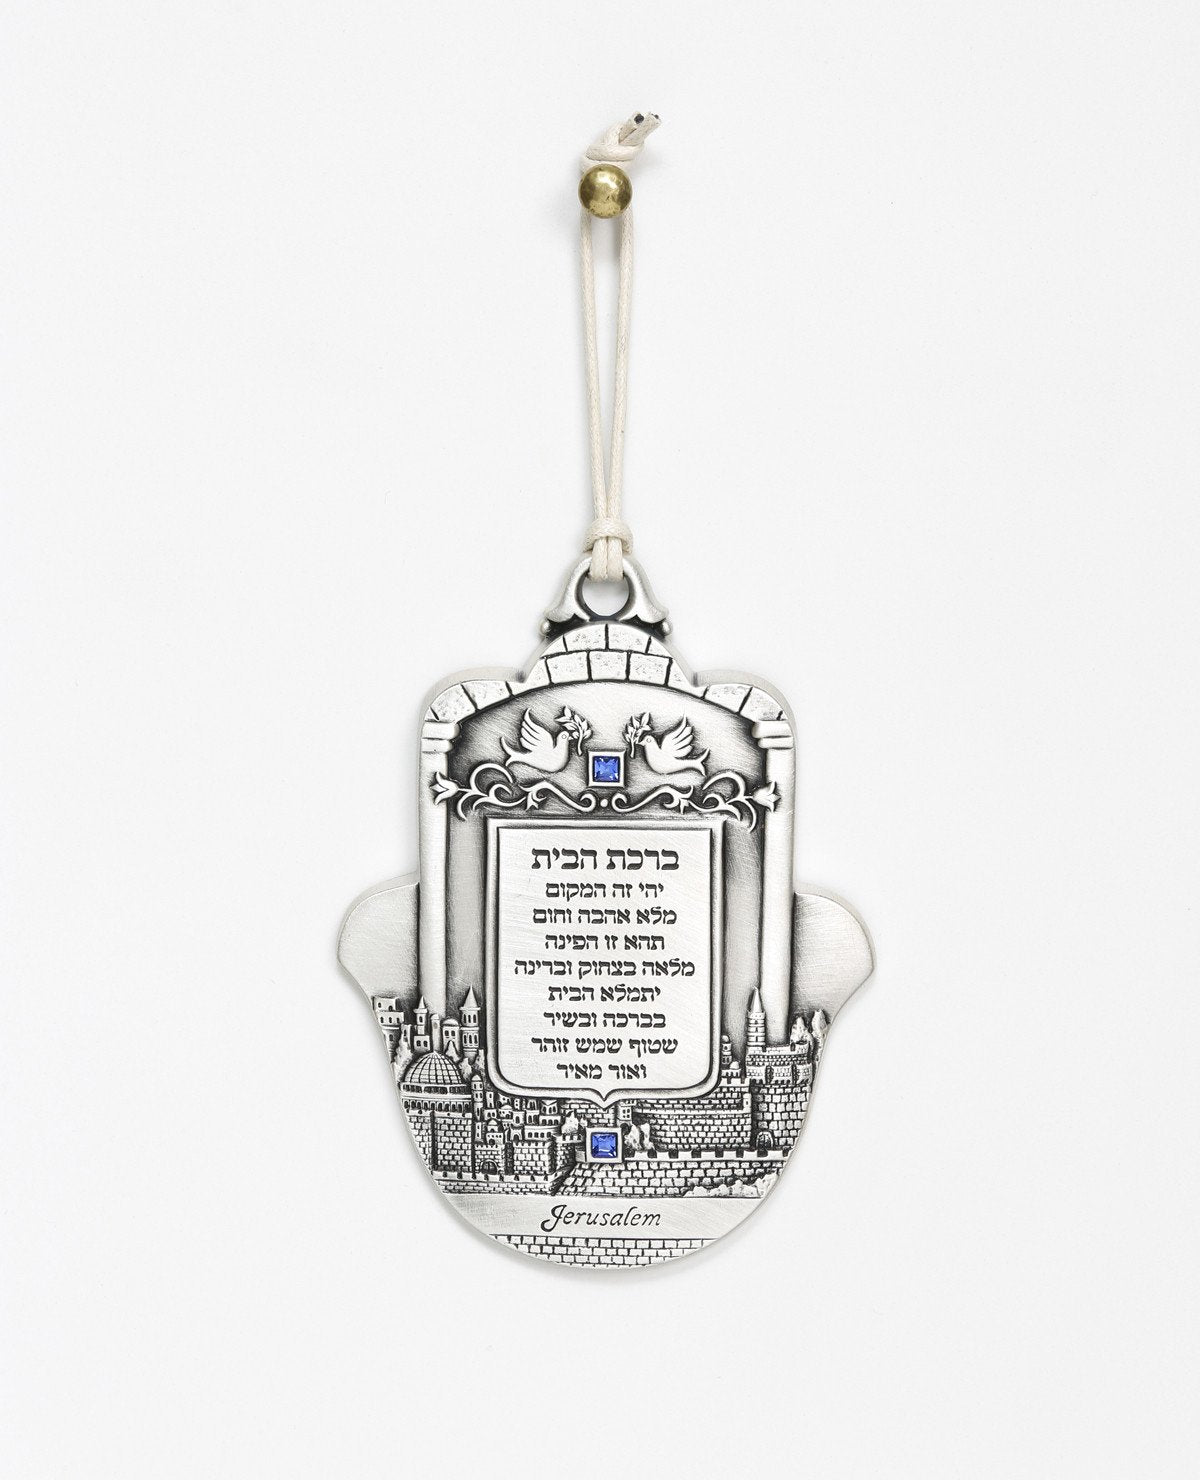 An impressively designed and uniquely decorated Hamsa hanging ornament coated in sterling silver. Decorated with an embossed image of Jerusalem and a pair of peace doves with an olive branch, alongside blessing words of love, joy, laughter and light for the home. Makes a thoughtful and loving gift that will brighten up any house. The Hamsa is embedded with blue Swarovski crystals and a natural colored faux leather string. 
Comes also in your choice of azure embedding. Additional languages available: English